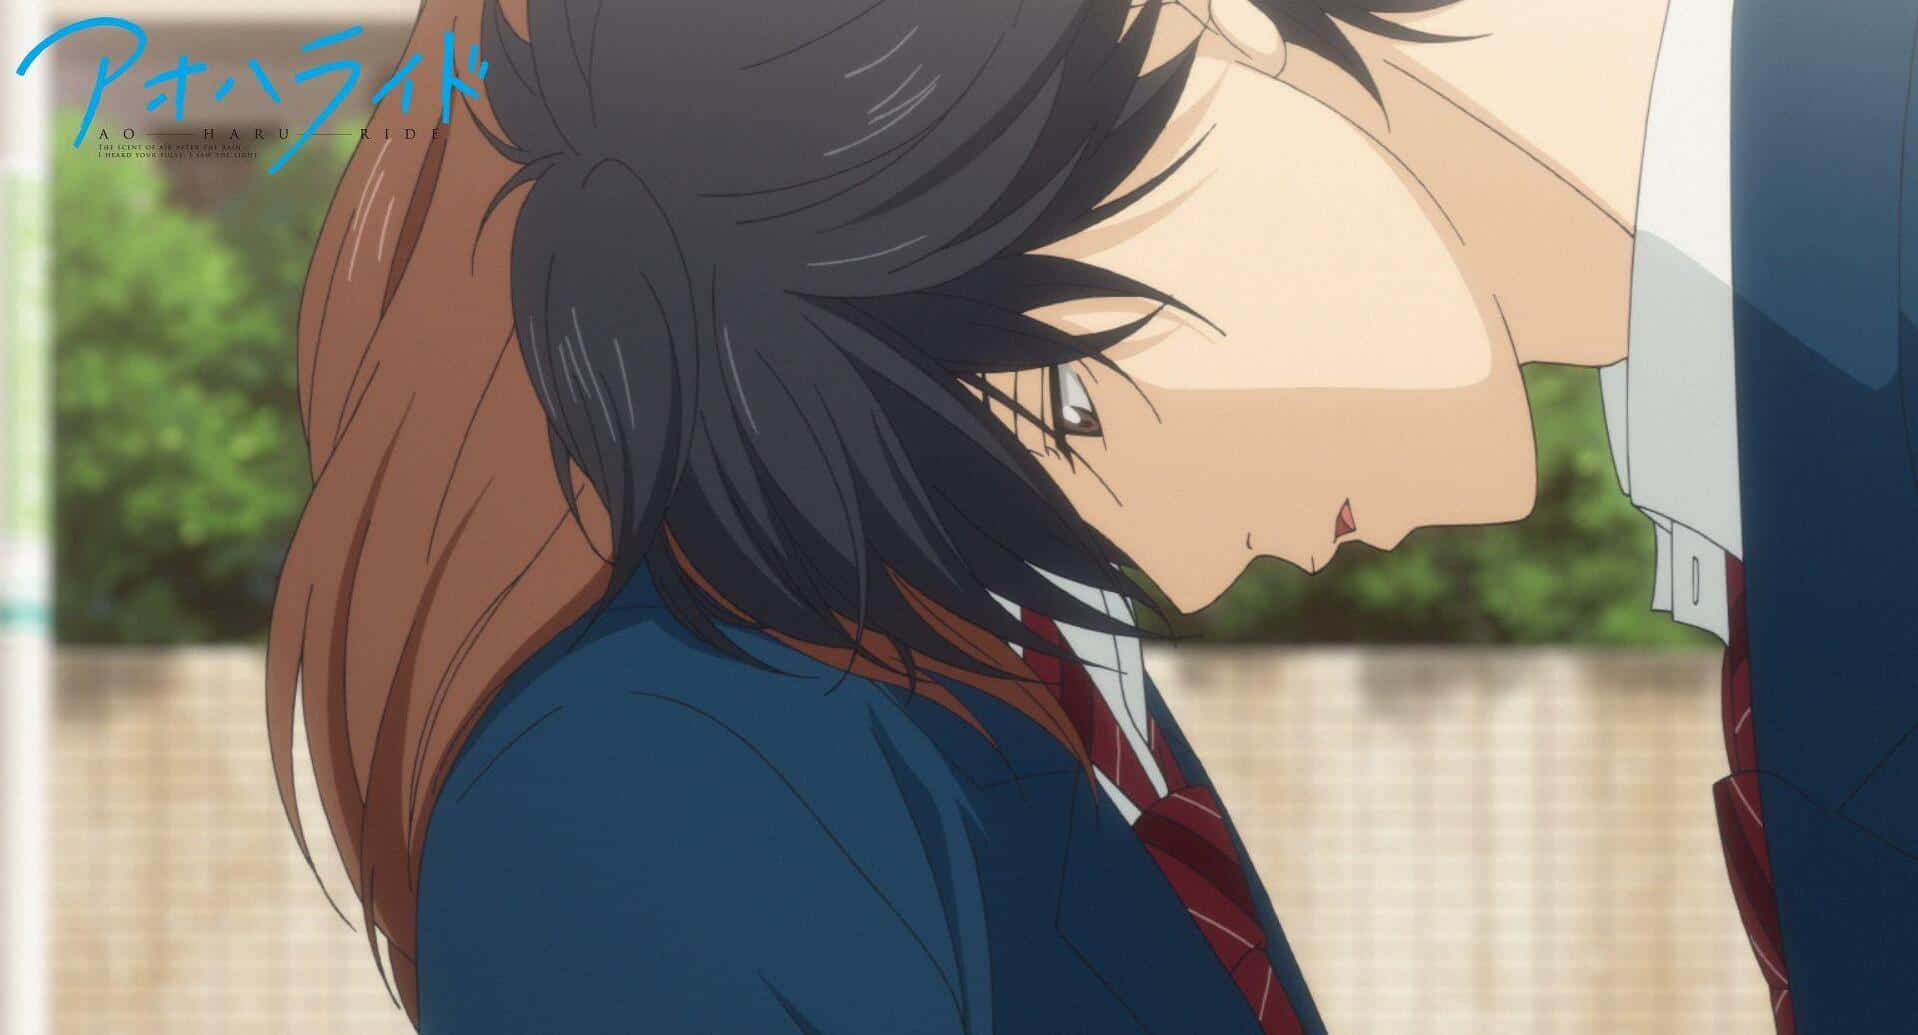 "Beauty in Every Moment;Romance Unfolds in Ao Haru Ride"